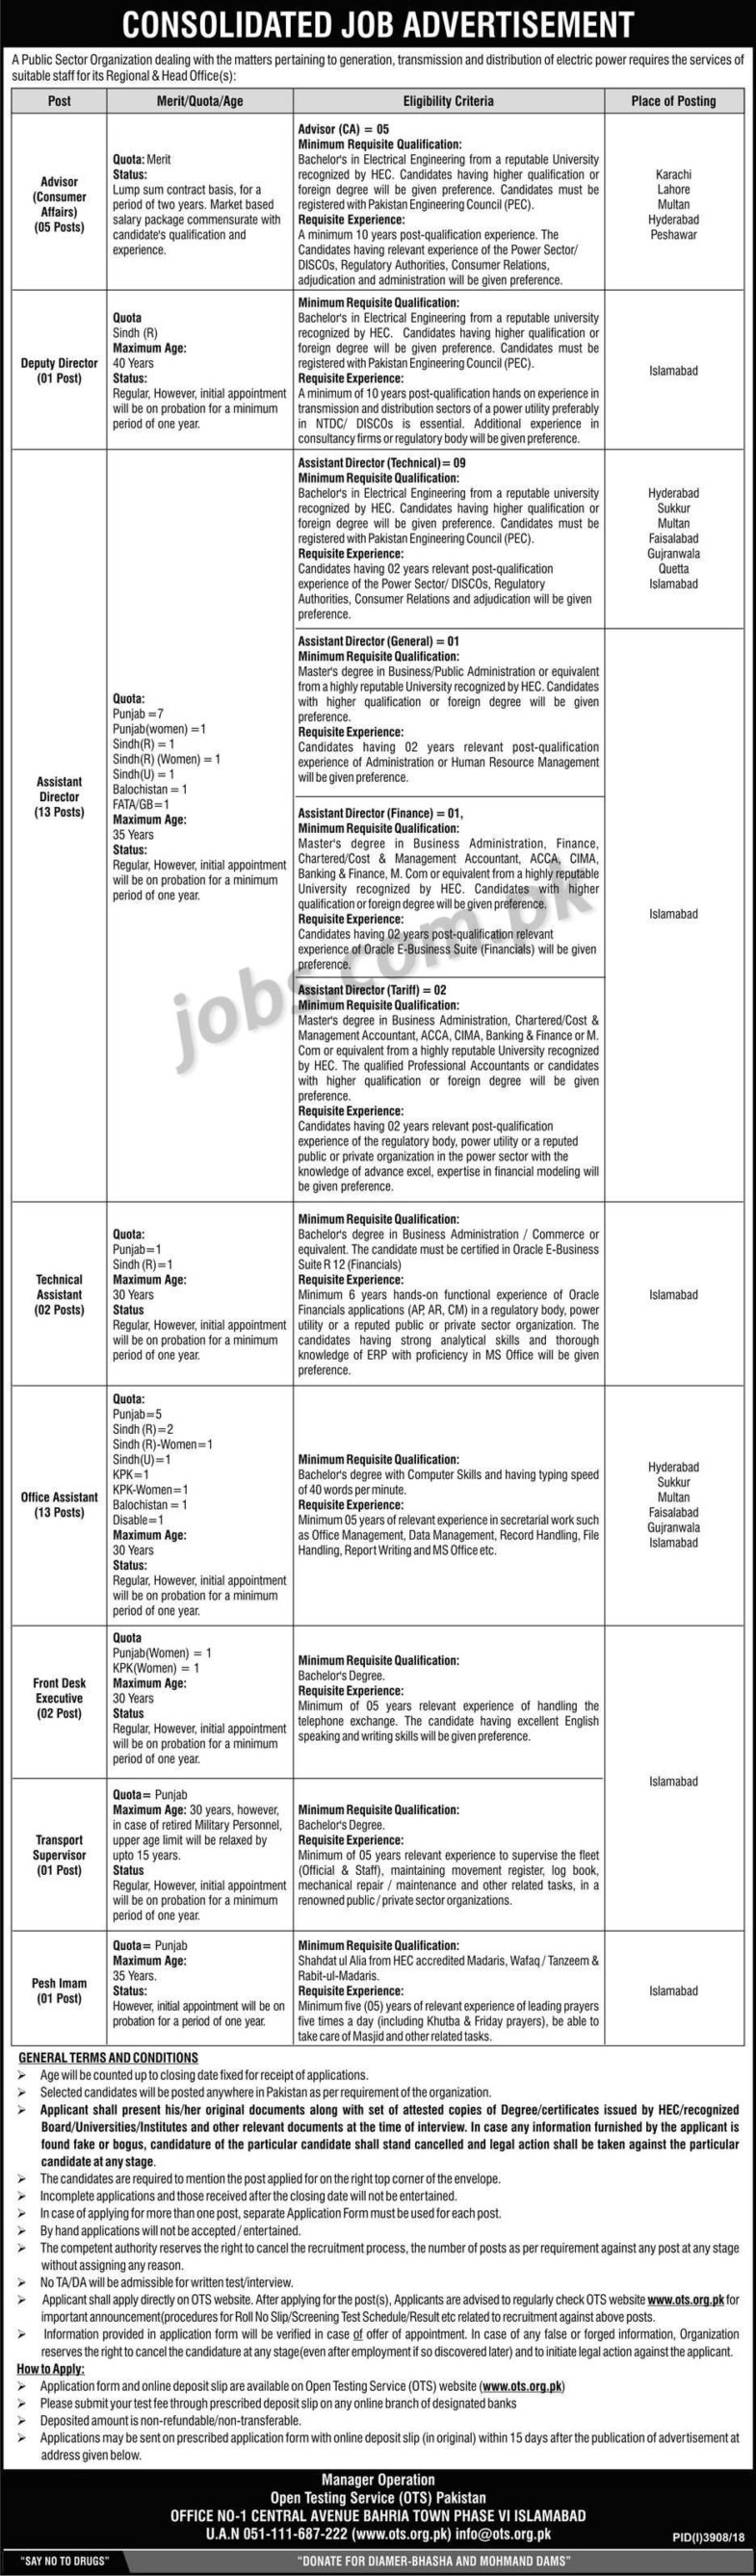 Power Sector Federal Govt Organization Jobs 2019 for 38+ Admin, Office, Asst/Dy Directors, Transport & Other Staff Posts (Multiple Cities) (Download OTS Form)